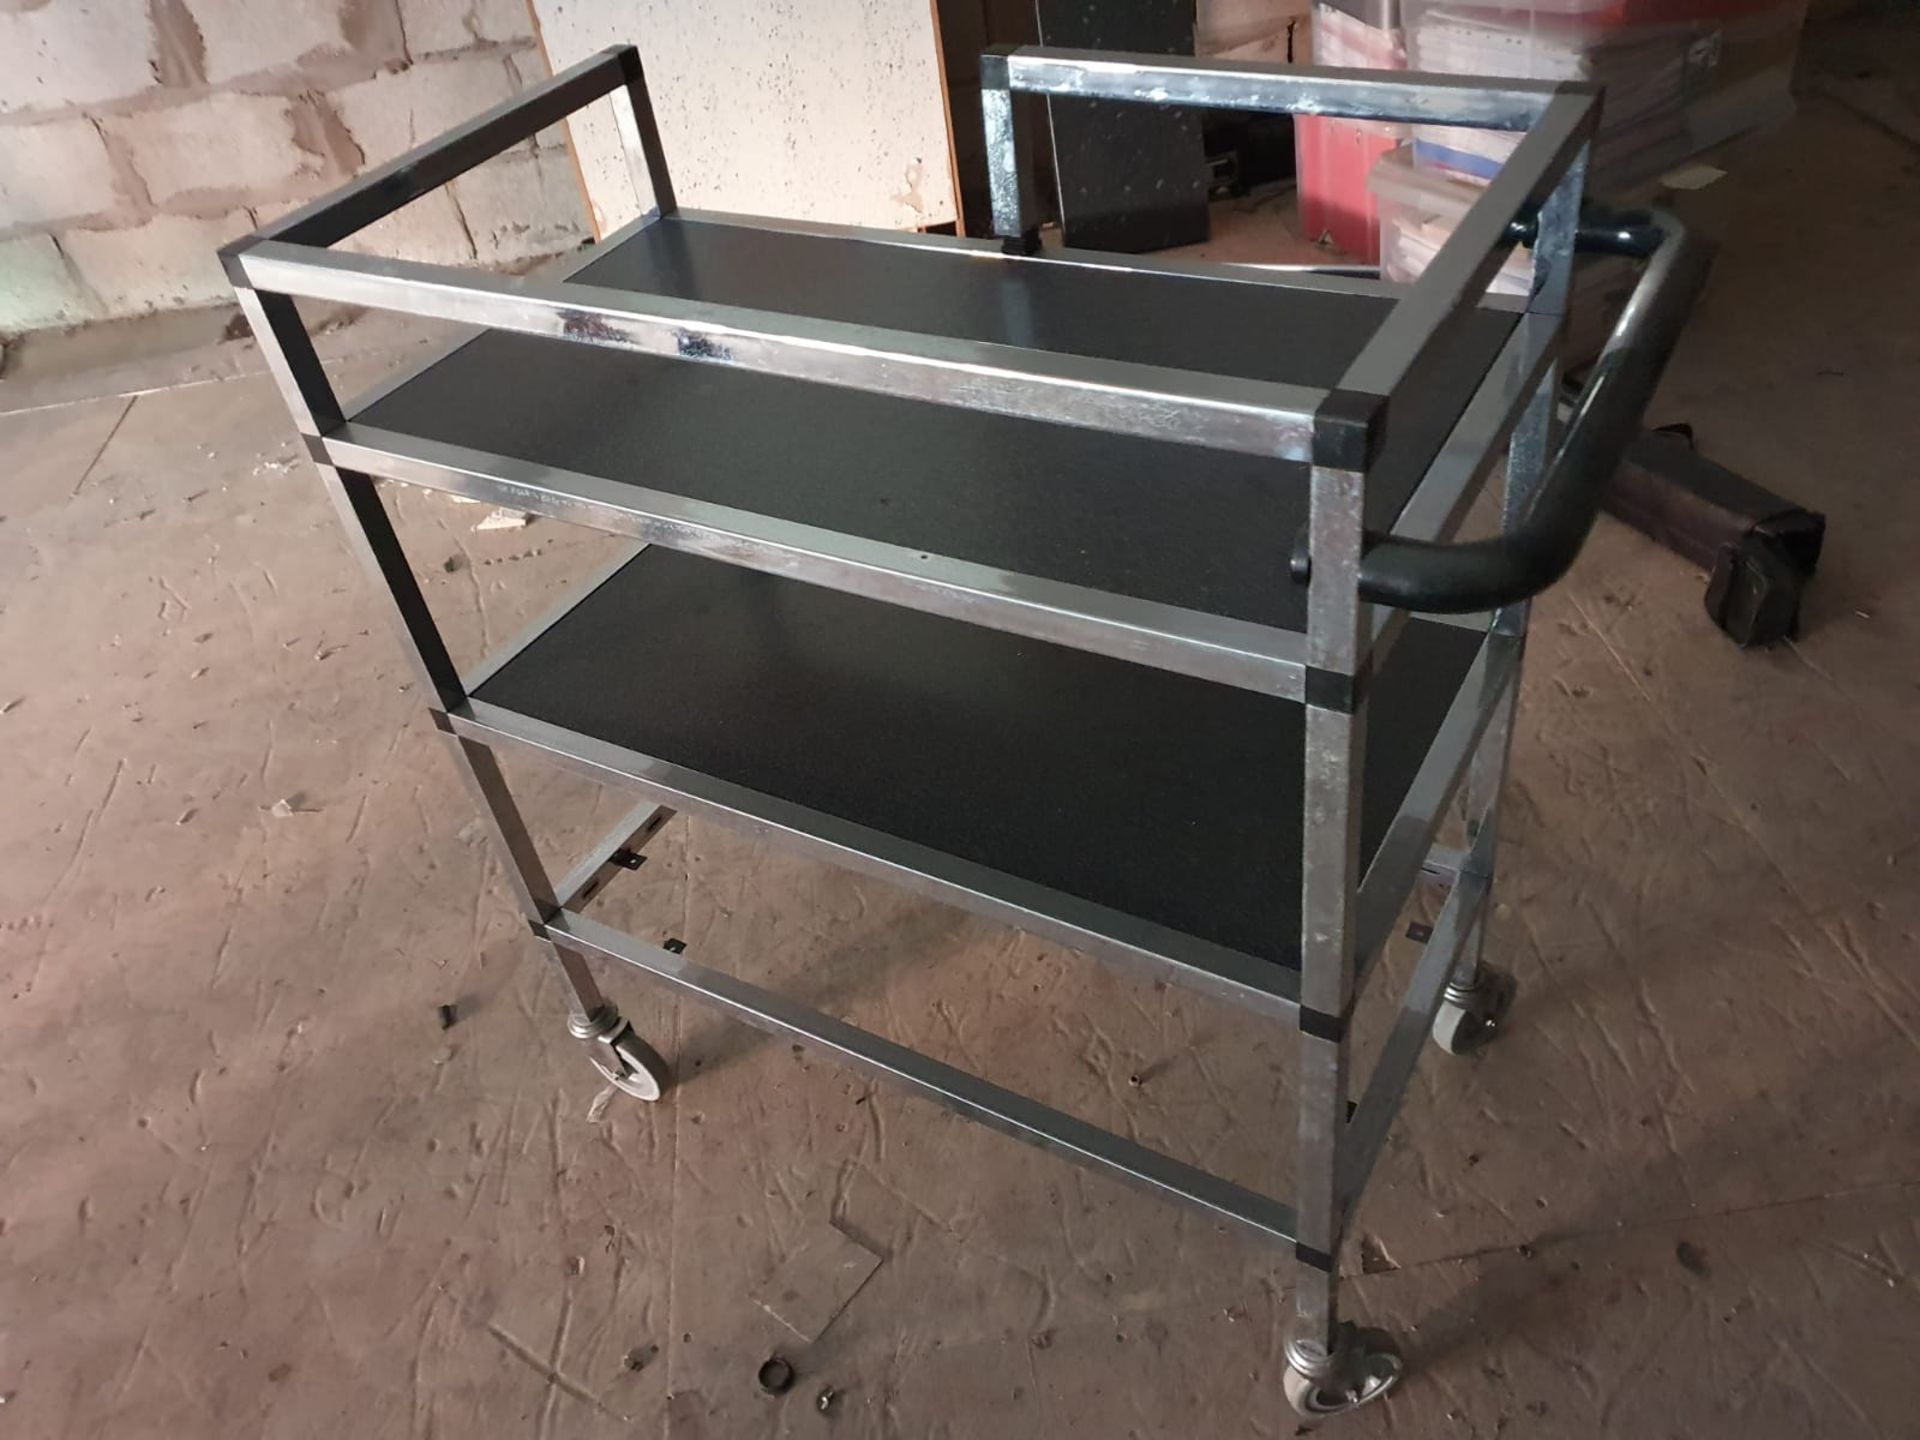 1 x Mobile Trolley With Pull/Push Handle and Castors - Chrome Finish With Black Shelves - CL515 - - Image 3 of 3